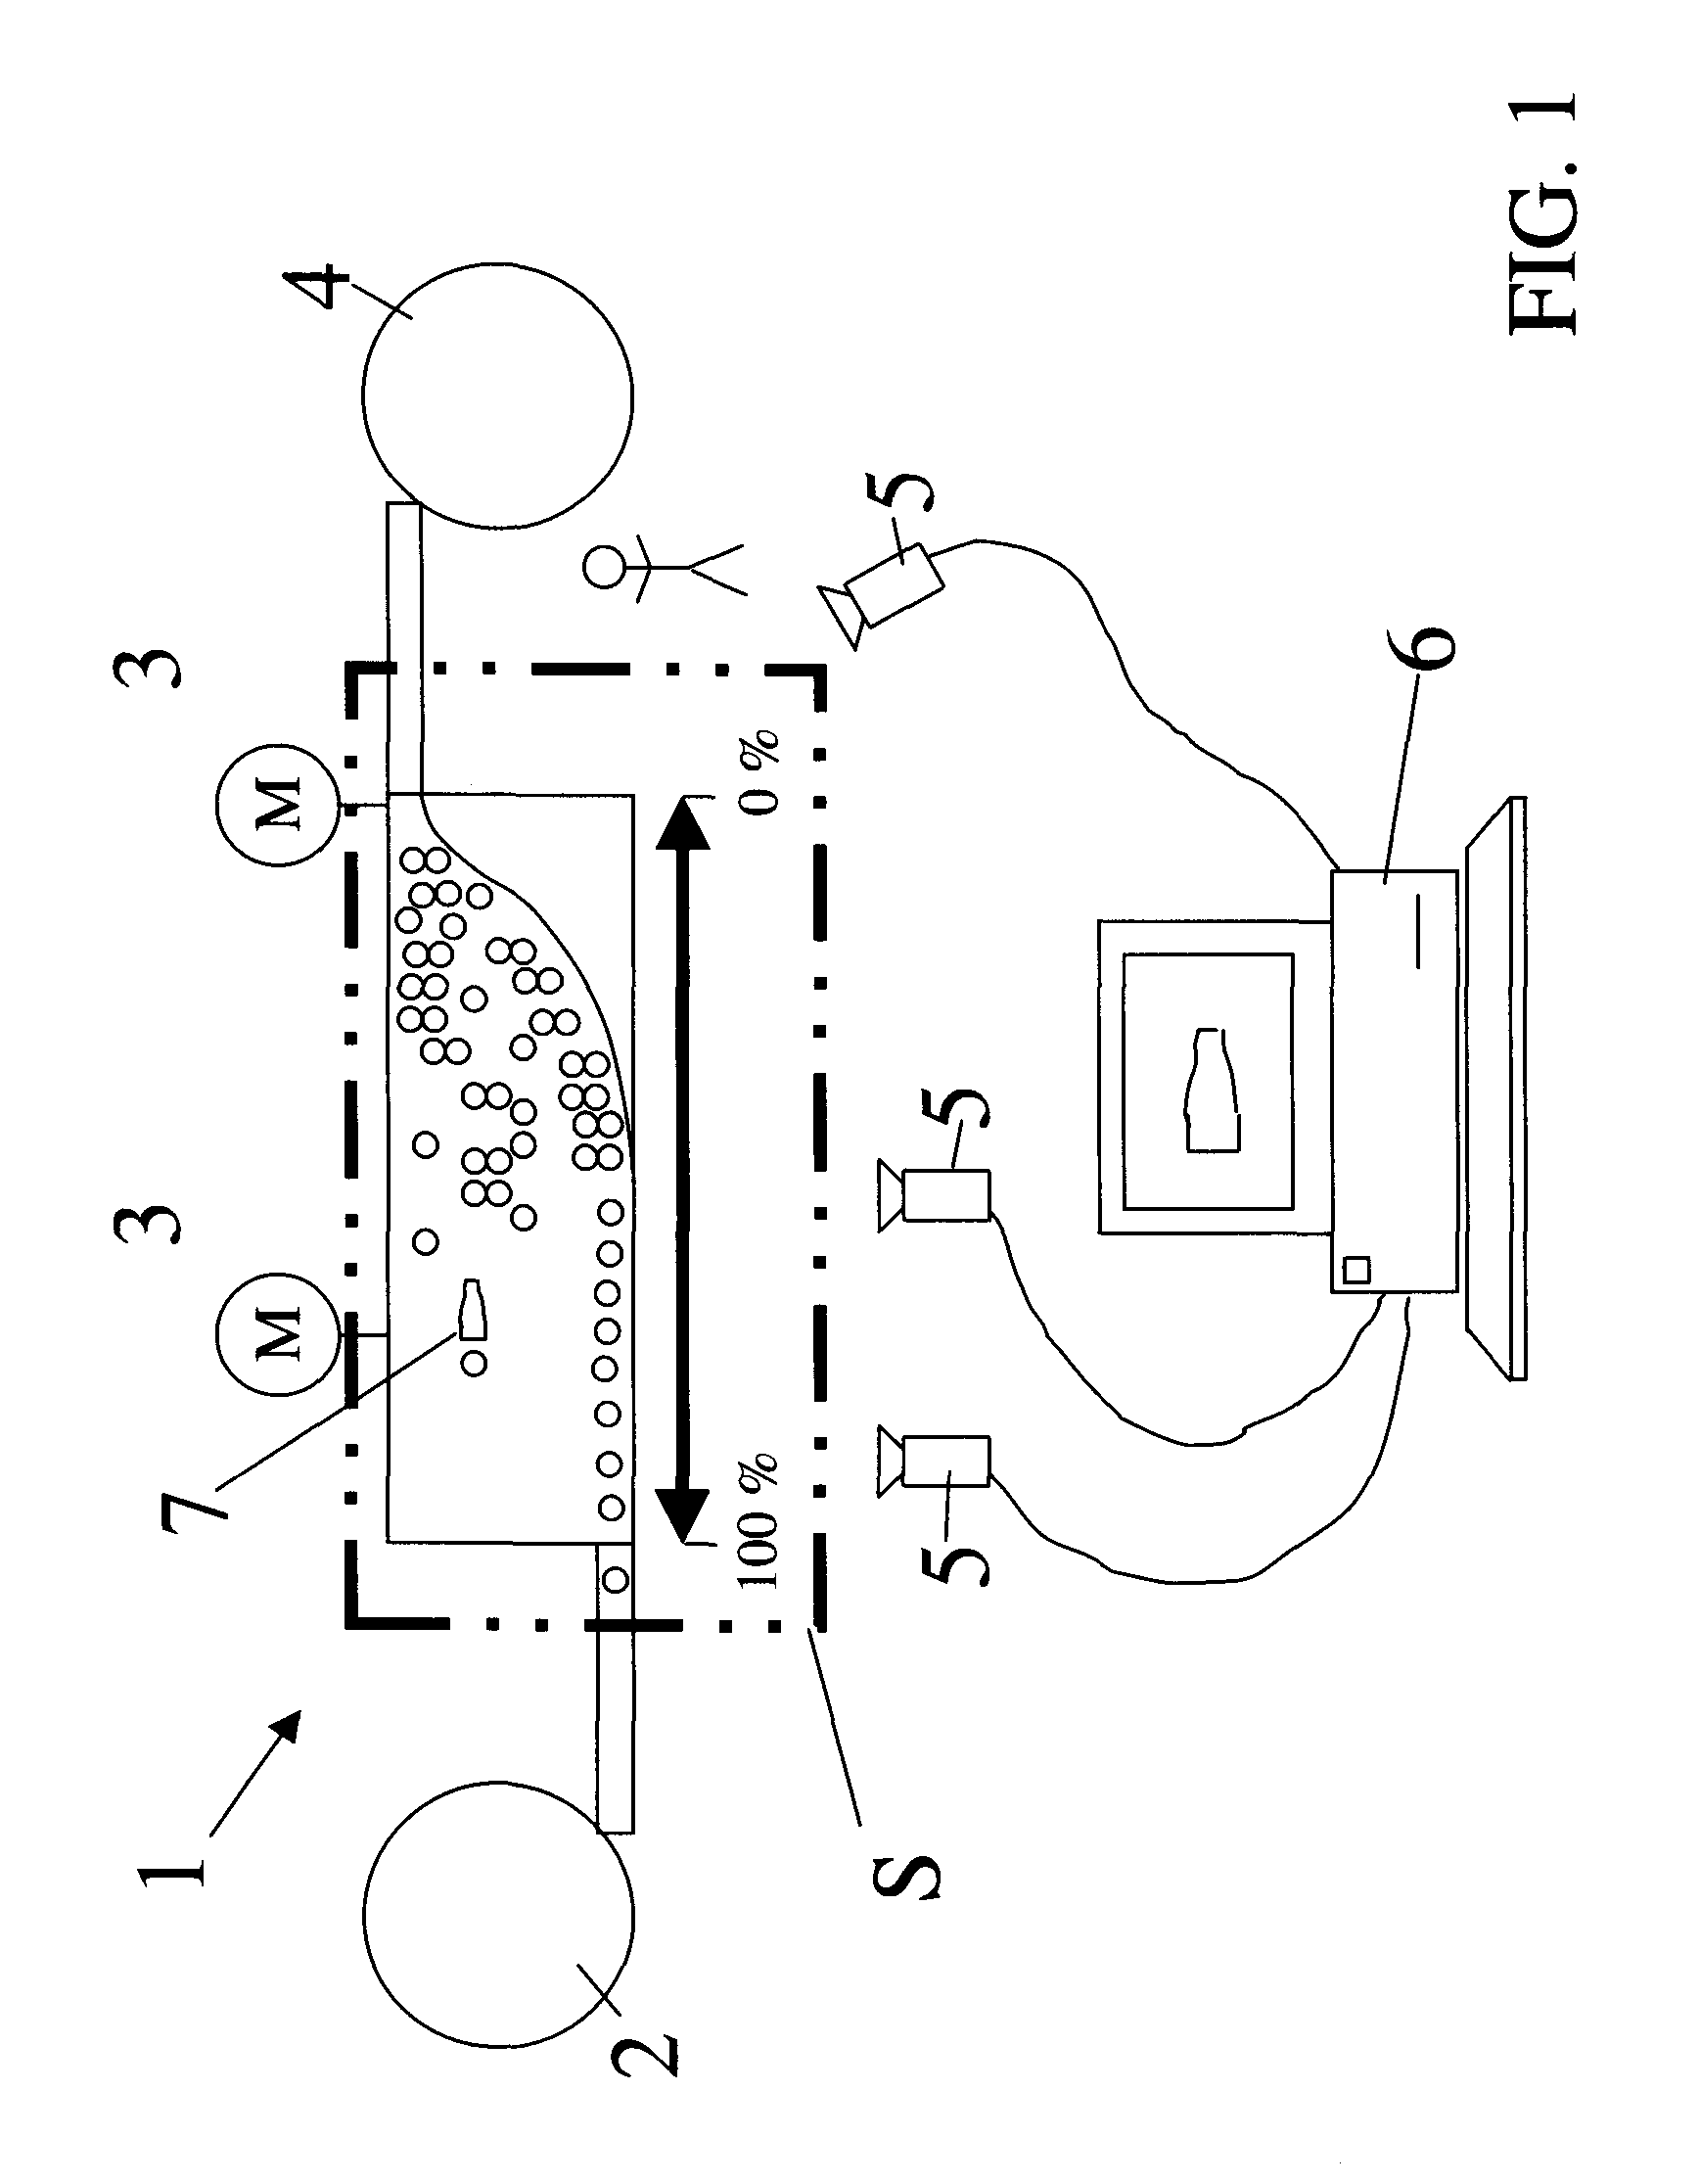 Method for the monitoring, control and optimization of filling equipment for foods and beverages, such as, for beverage bottles